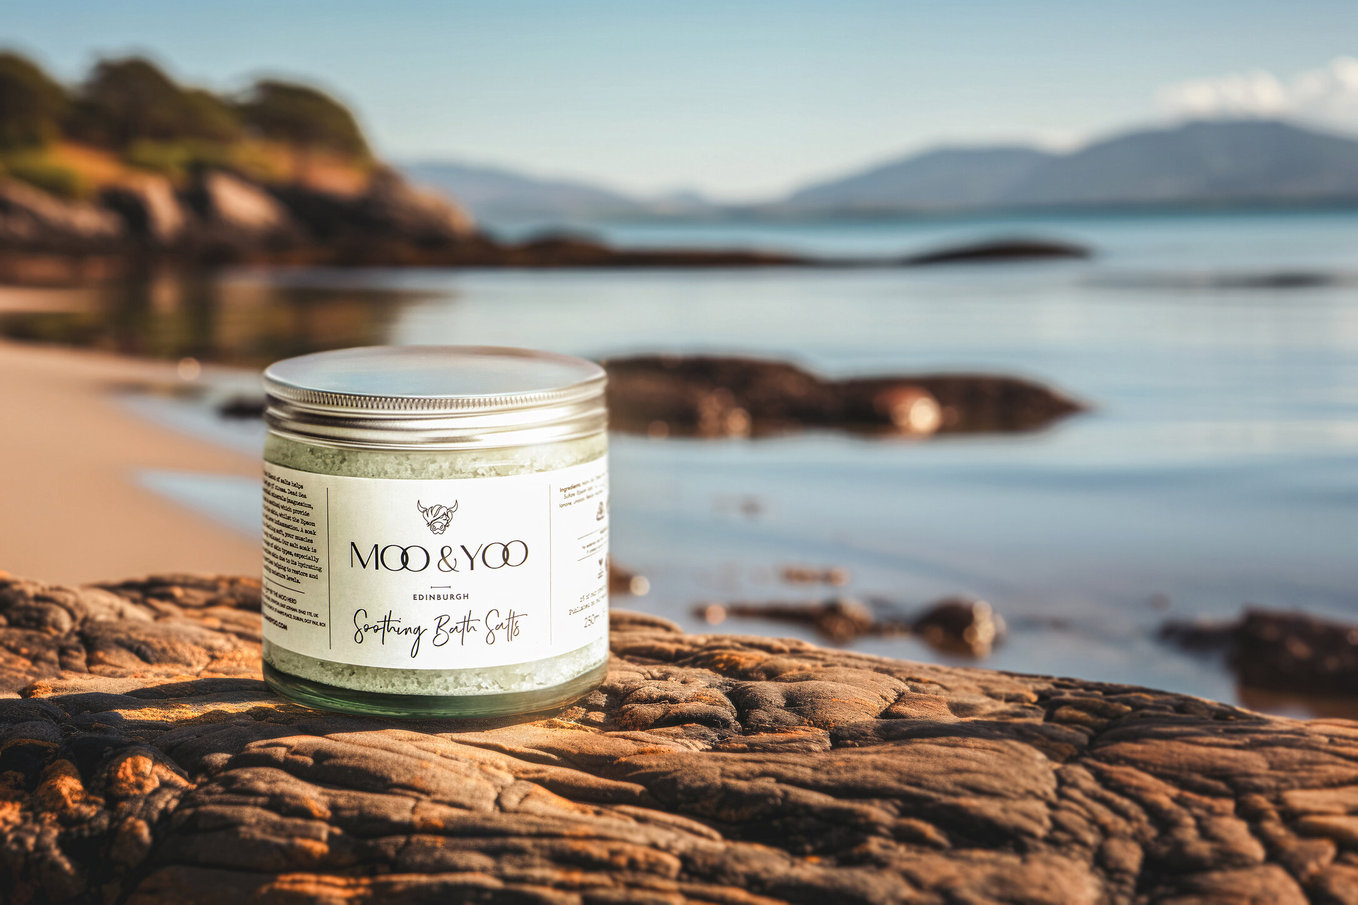 In conversation with Moo and Yoo: Udderly Sustainable Luxury in Hotel Toiletries and Amenities